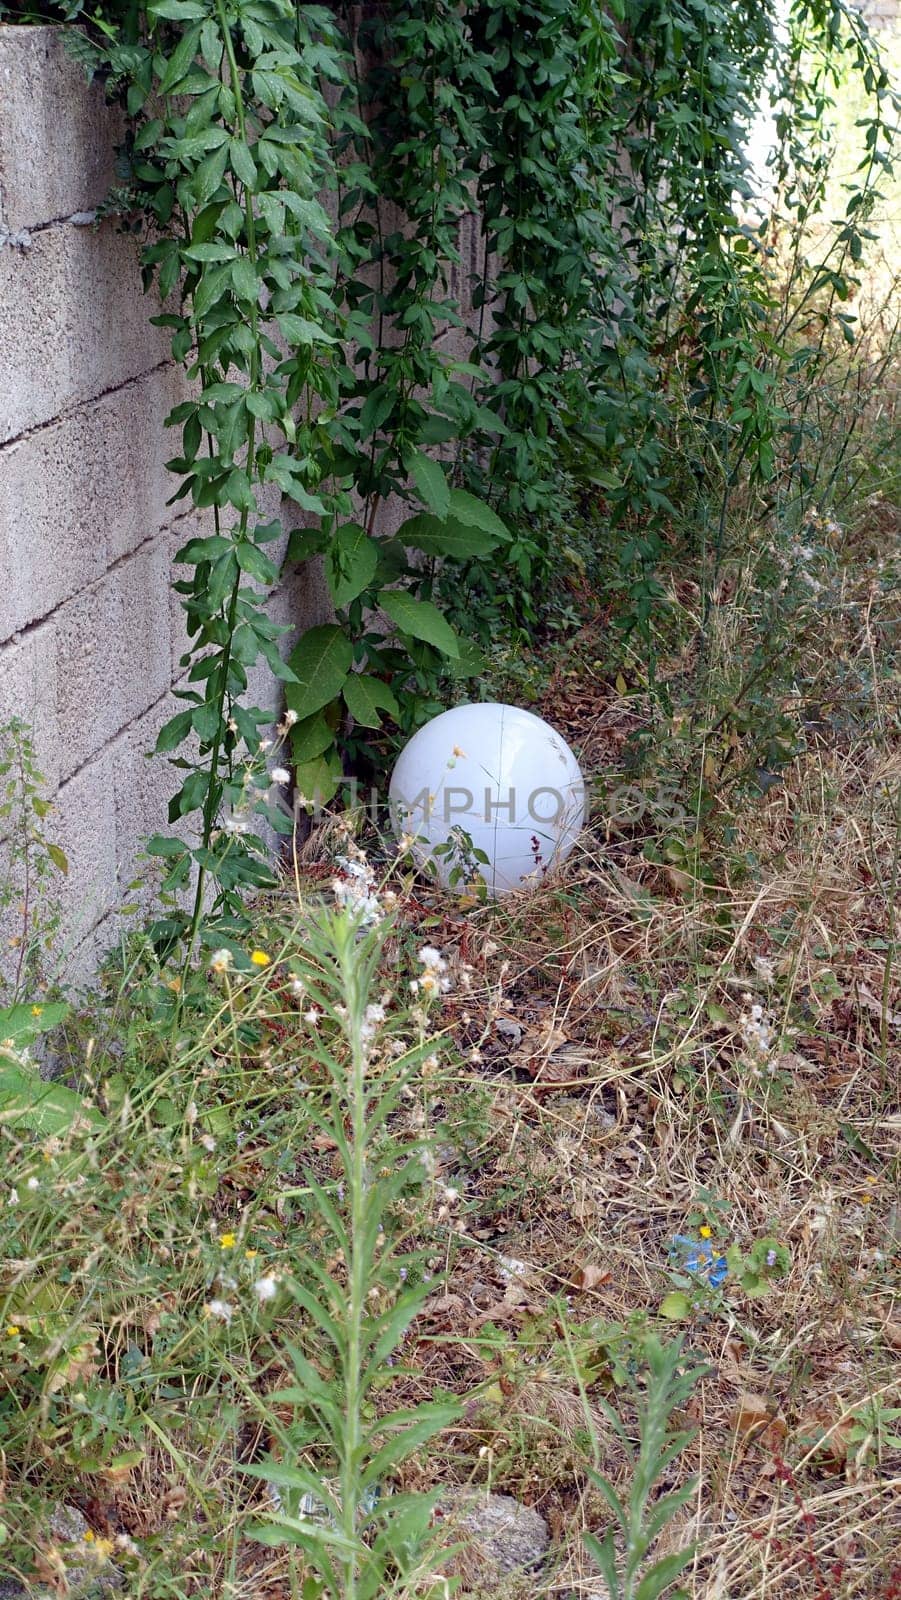 A white crystal sphere lying on the grass next to a wall during a hot summer day.